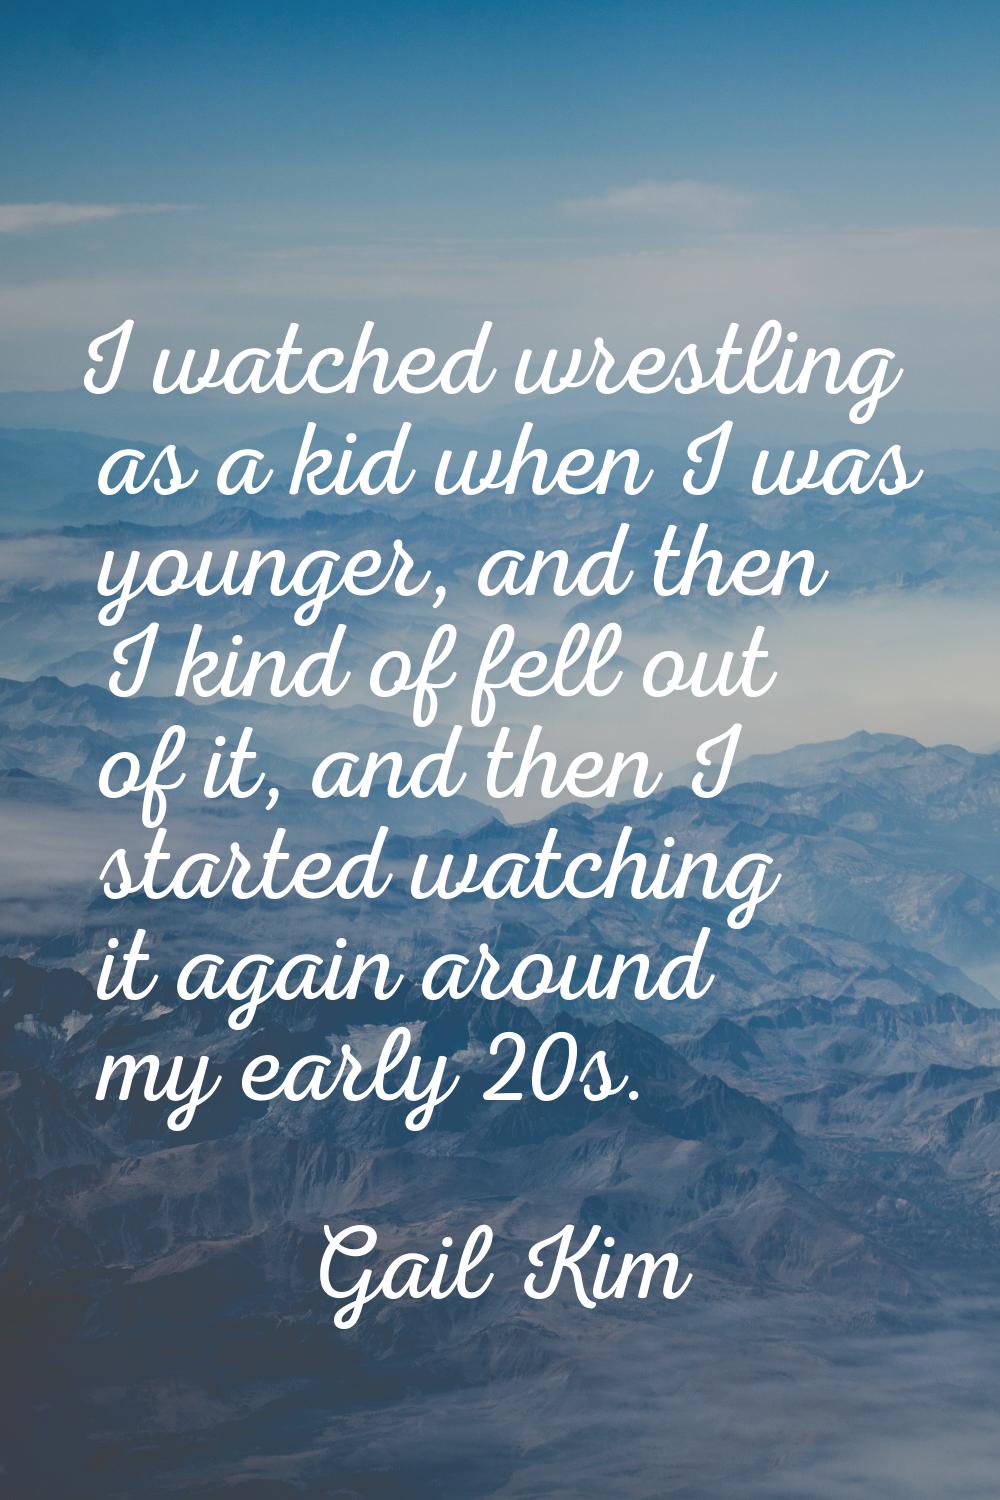 I watched wrestling as a kid when I was younger, and then I kind of fell out of it, and then I star